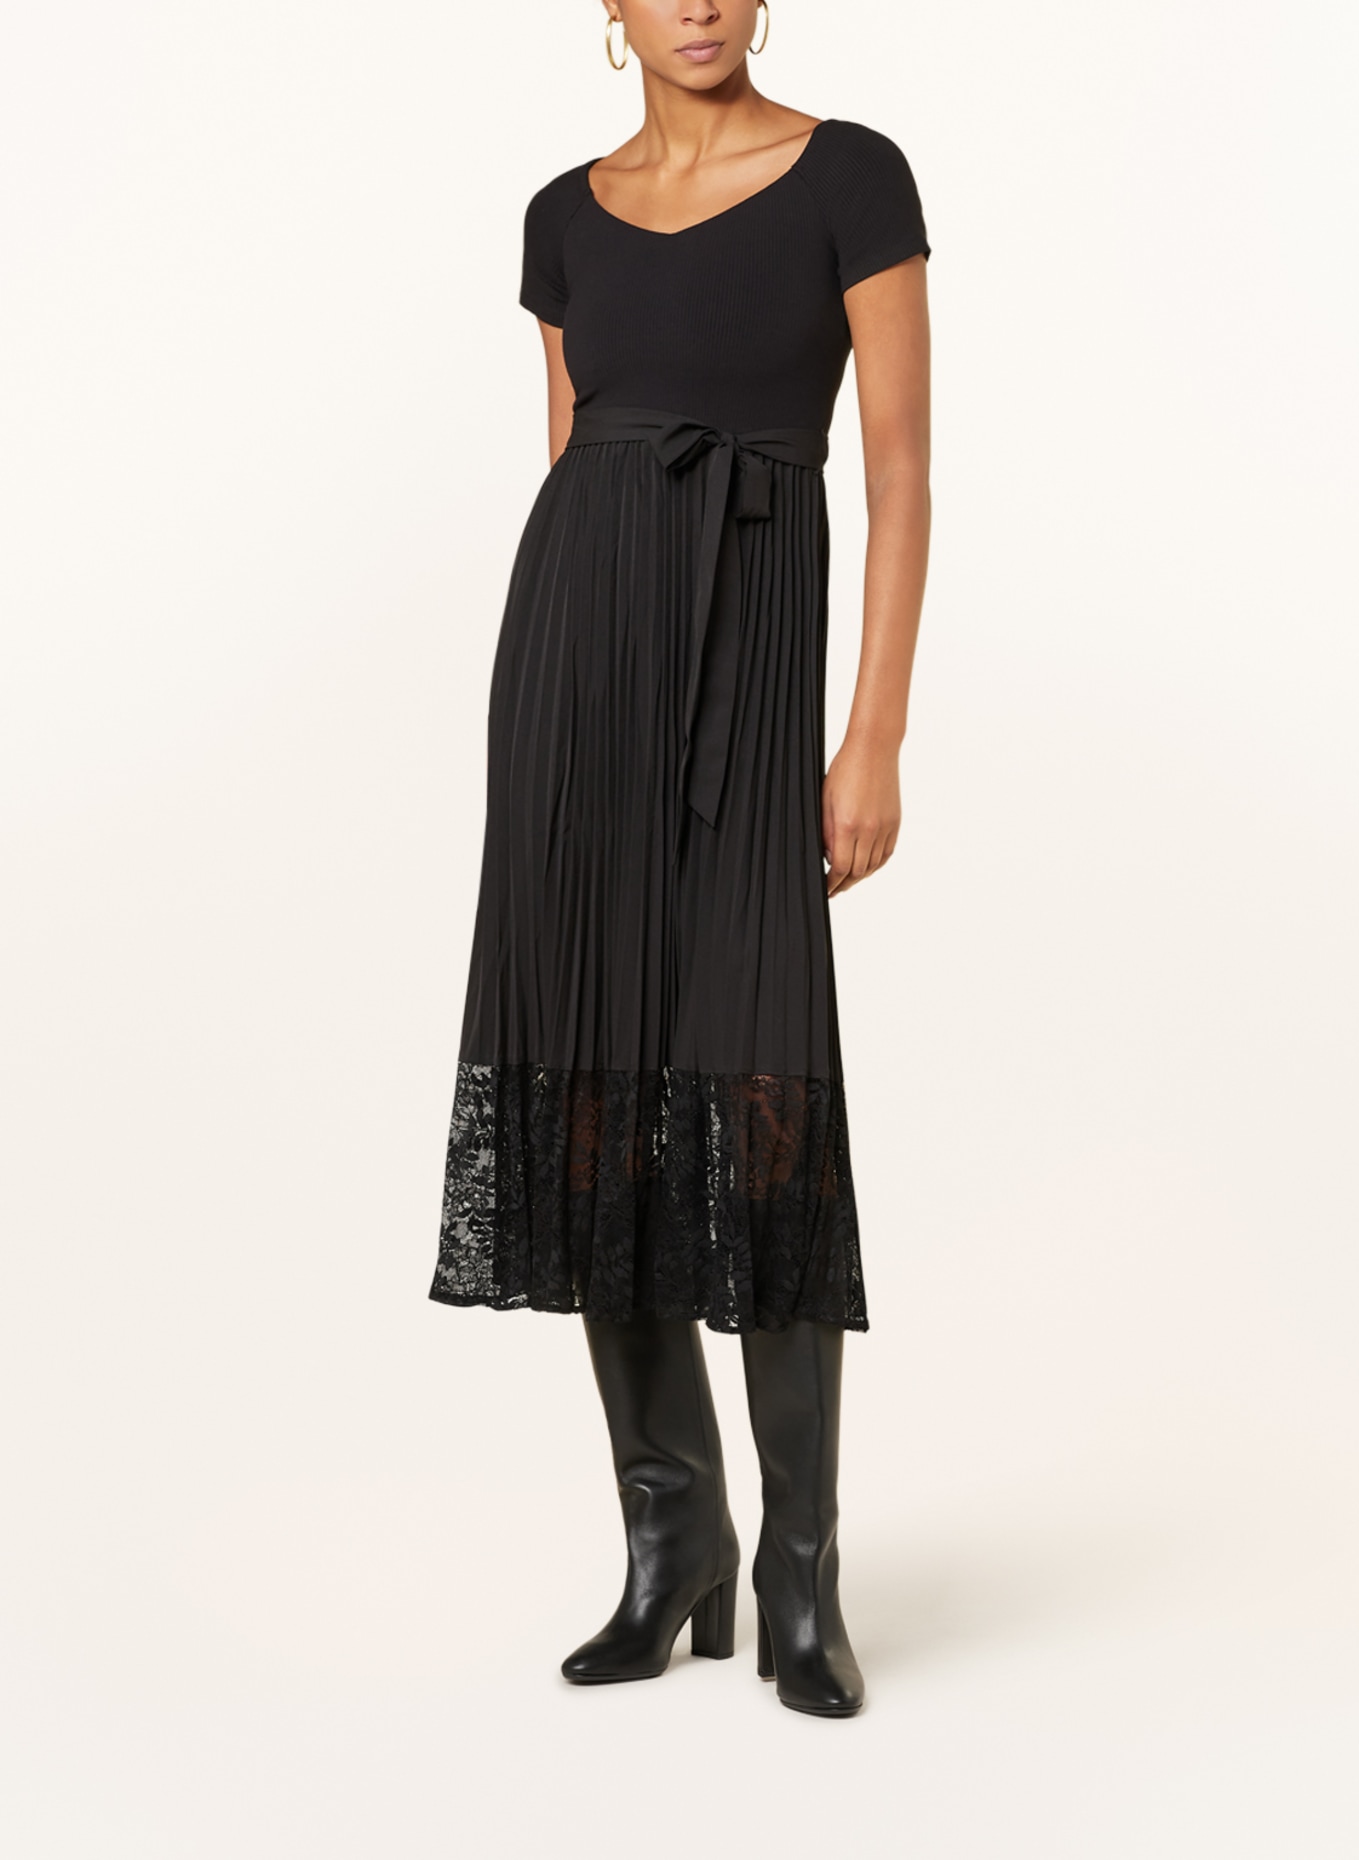 GUESS Dress TIANA in mixed materials with lace, Color: BLACK (Image 2)